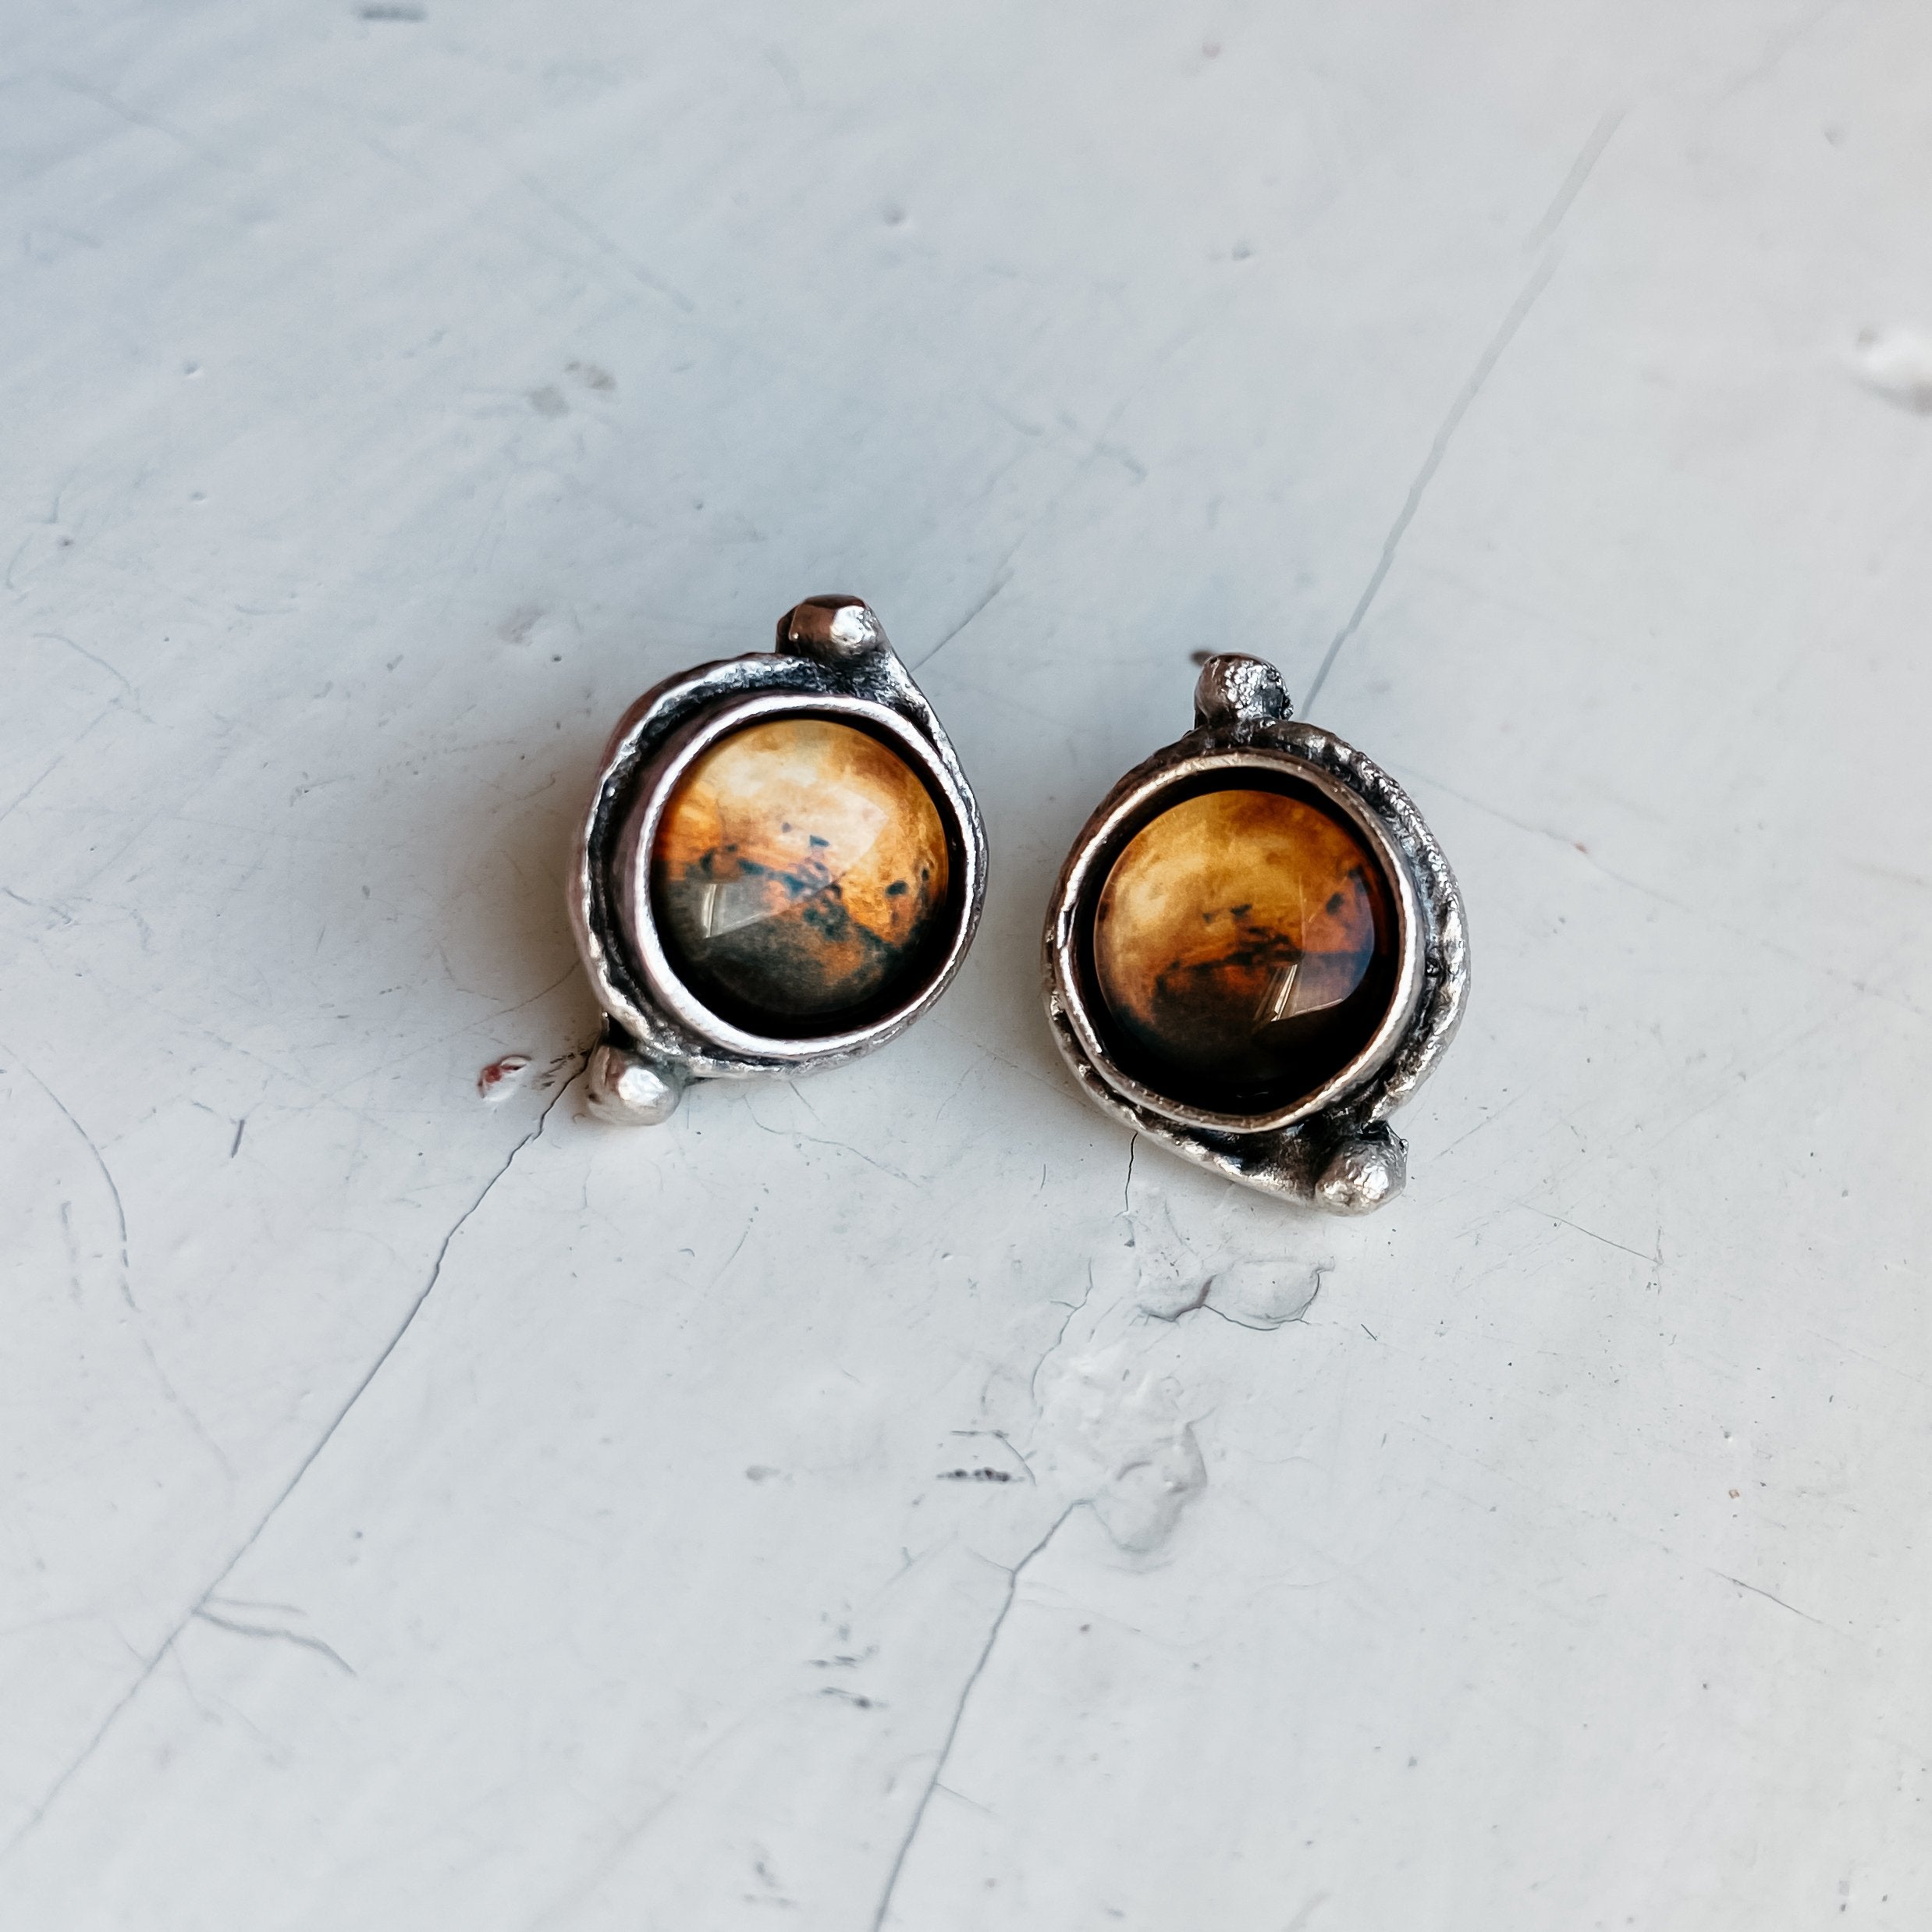 Mars and Moons Earrings - Studs or Dangles in Silver Plated Brass and Glass - Jewelry & Watches - Bijou Her -  -  - 